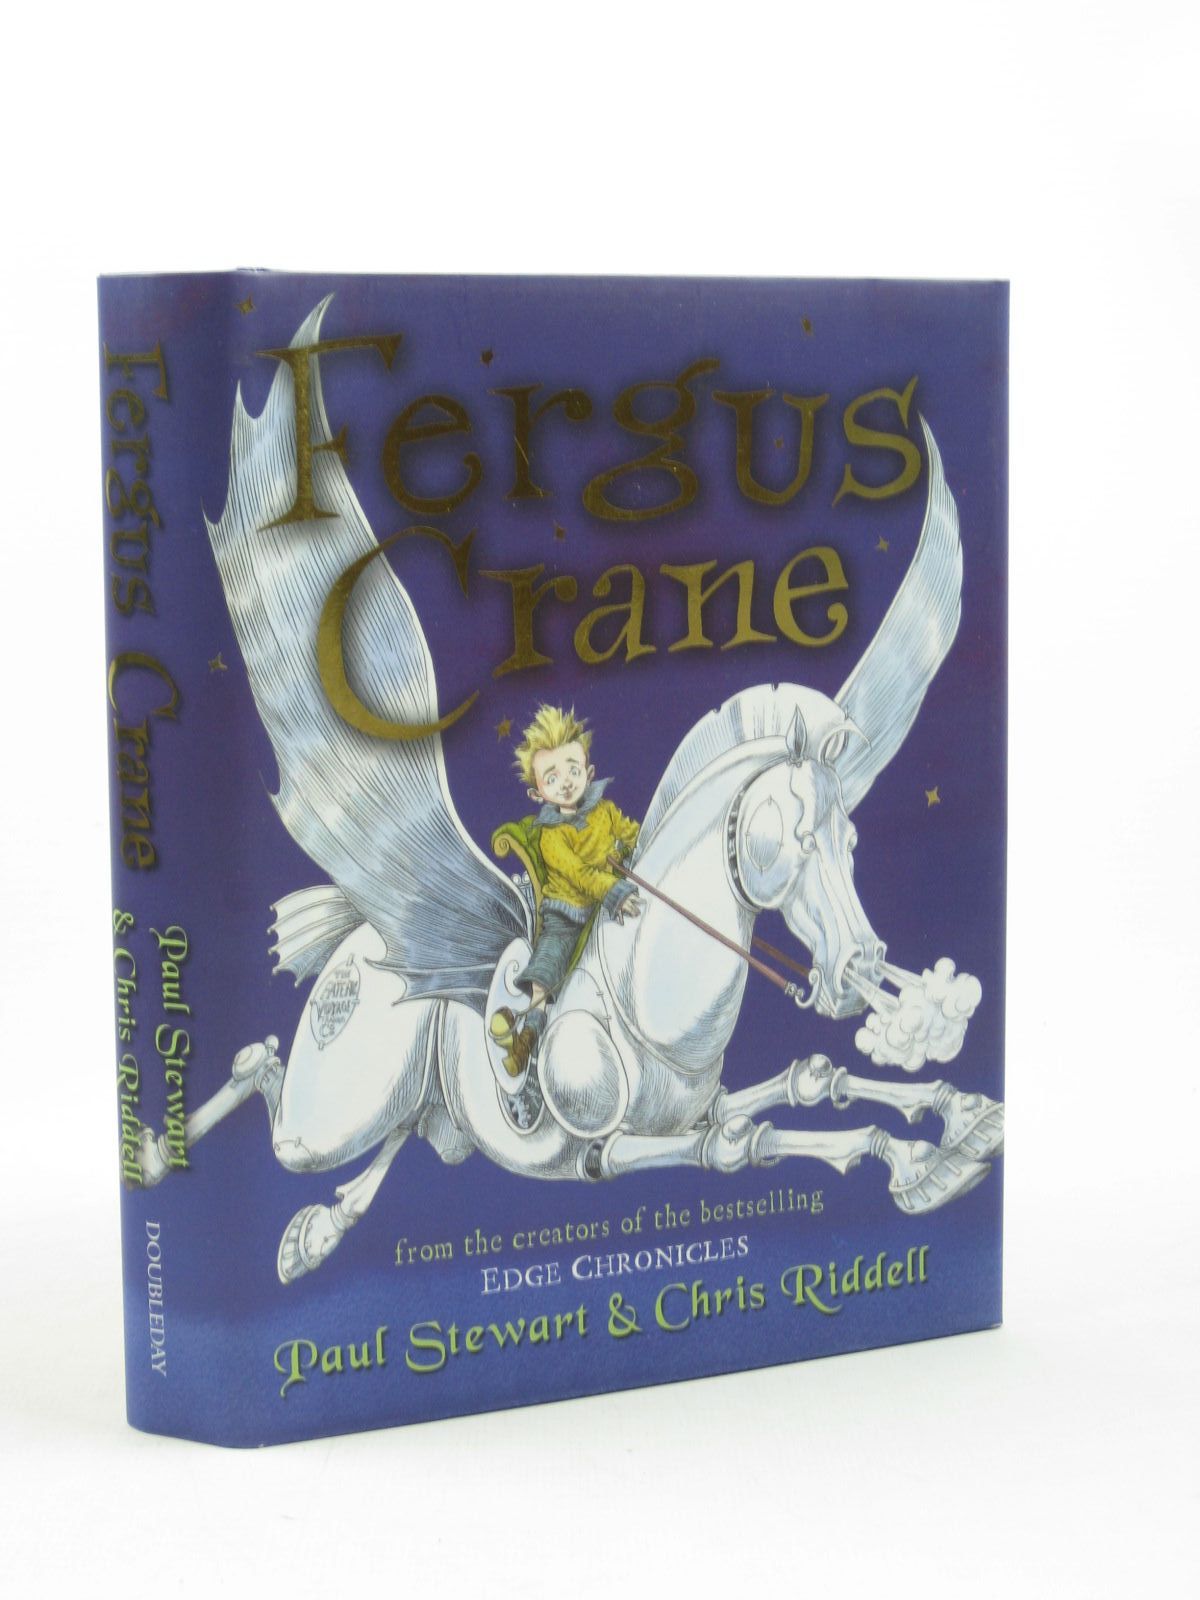 Photo of FERGUS CRANE written by Stewart, Paul illustrated by Riddell, Chris published by Doubleday (STOCK CODE: 1312667)  for sale by Stella & Rose's Books